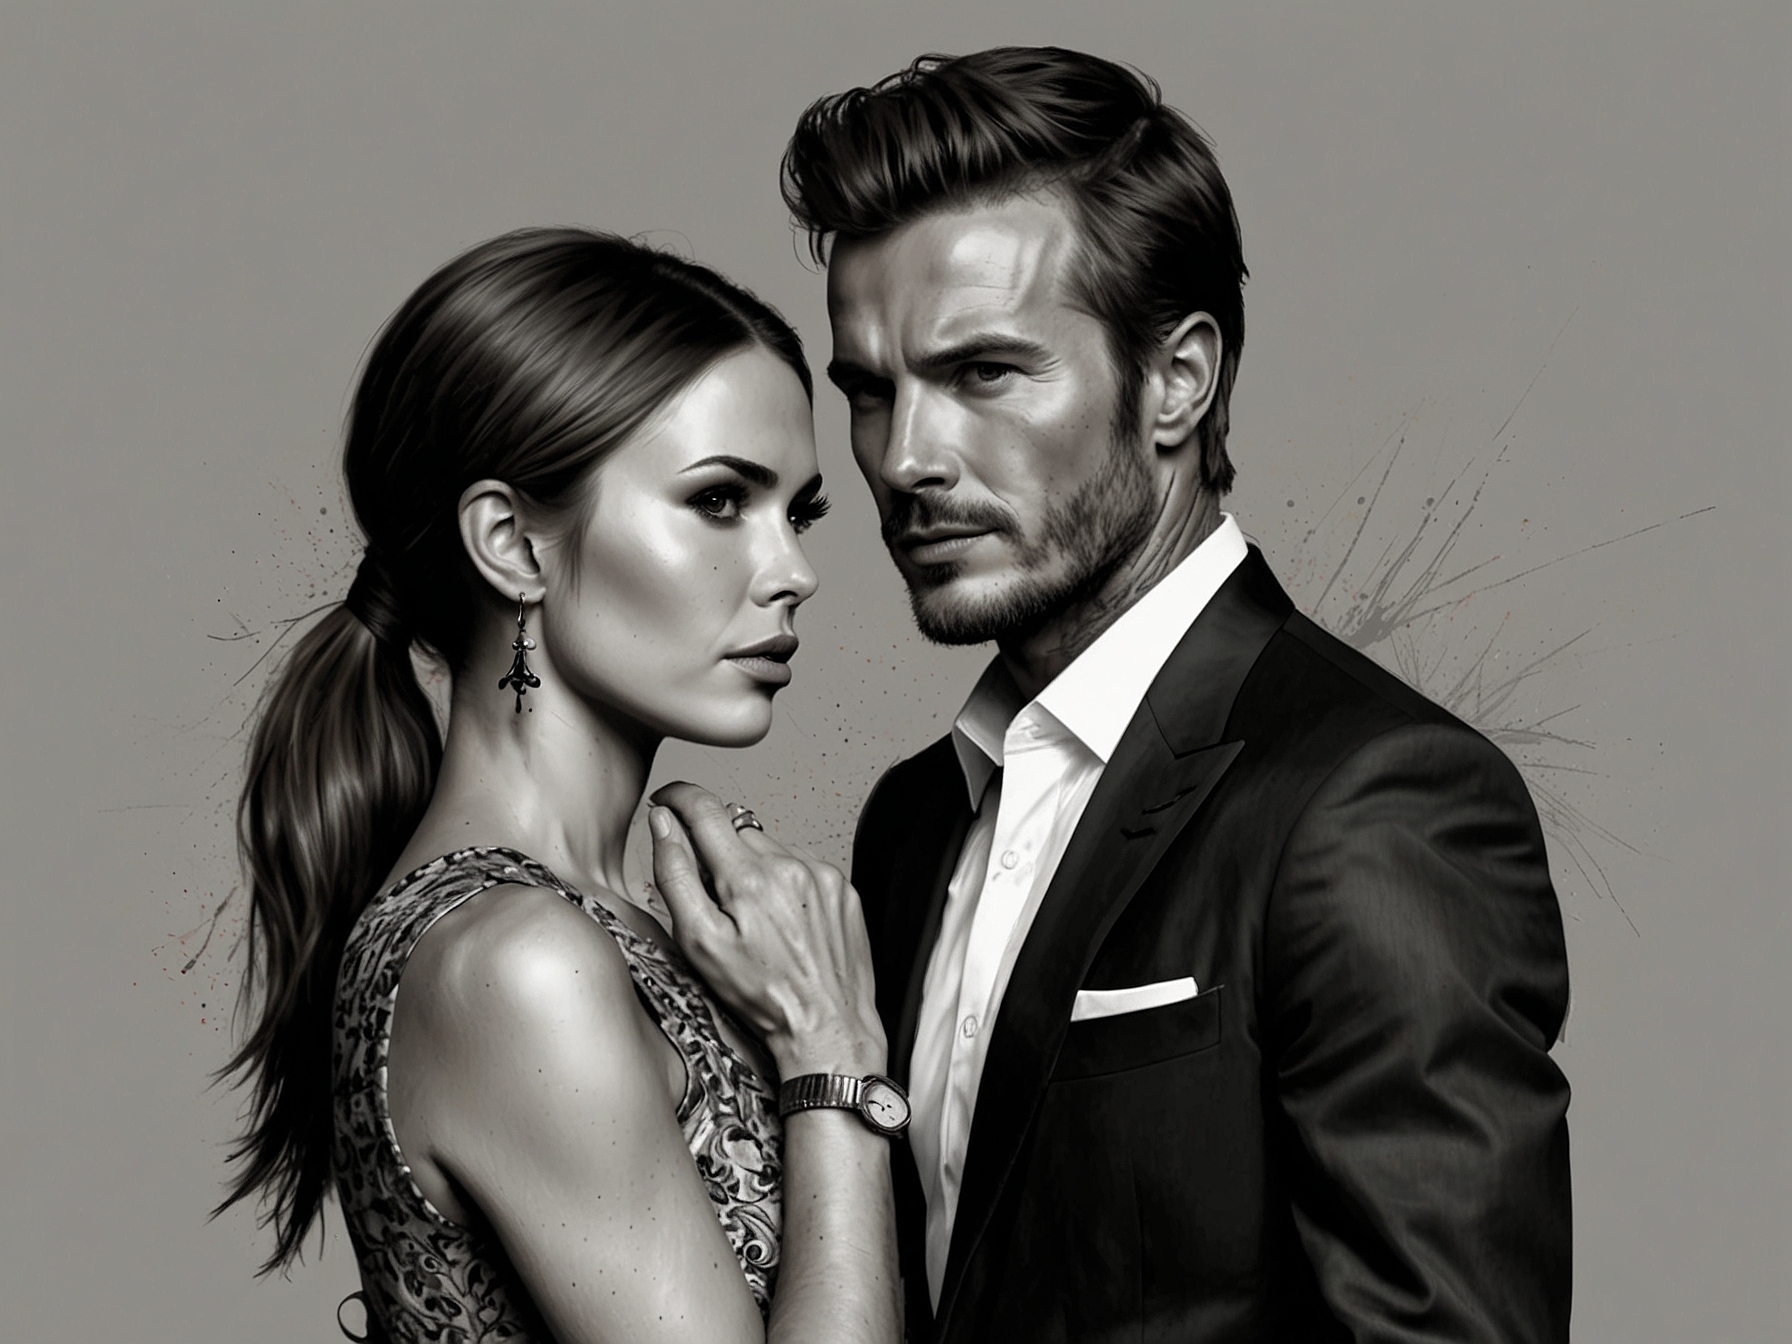 A tense moment portrayed between Victoria and David Beckham, highlighting the strain in their relationship after affair rumors.